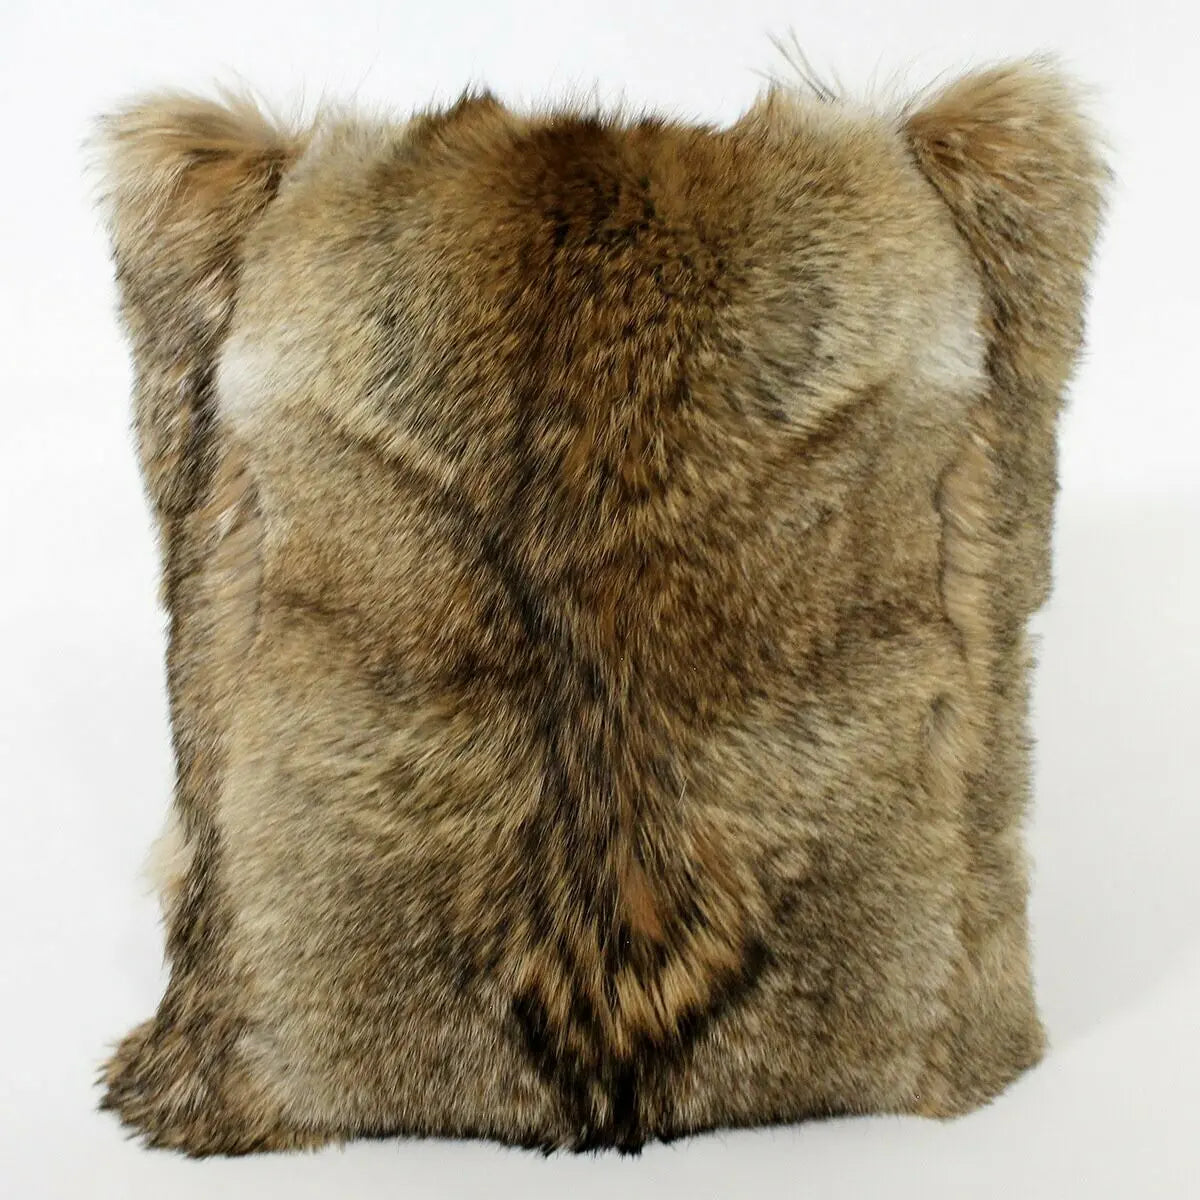 Eastern Coyote Fur Pillow